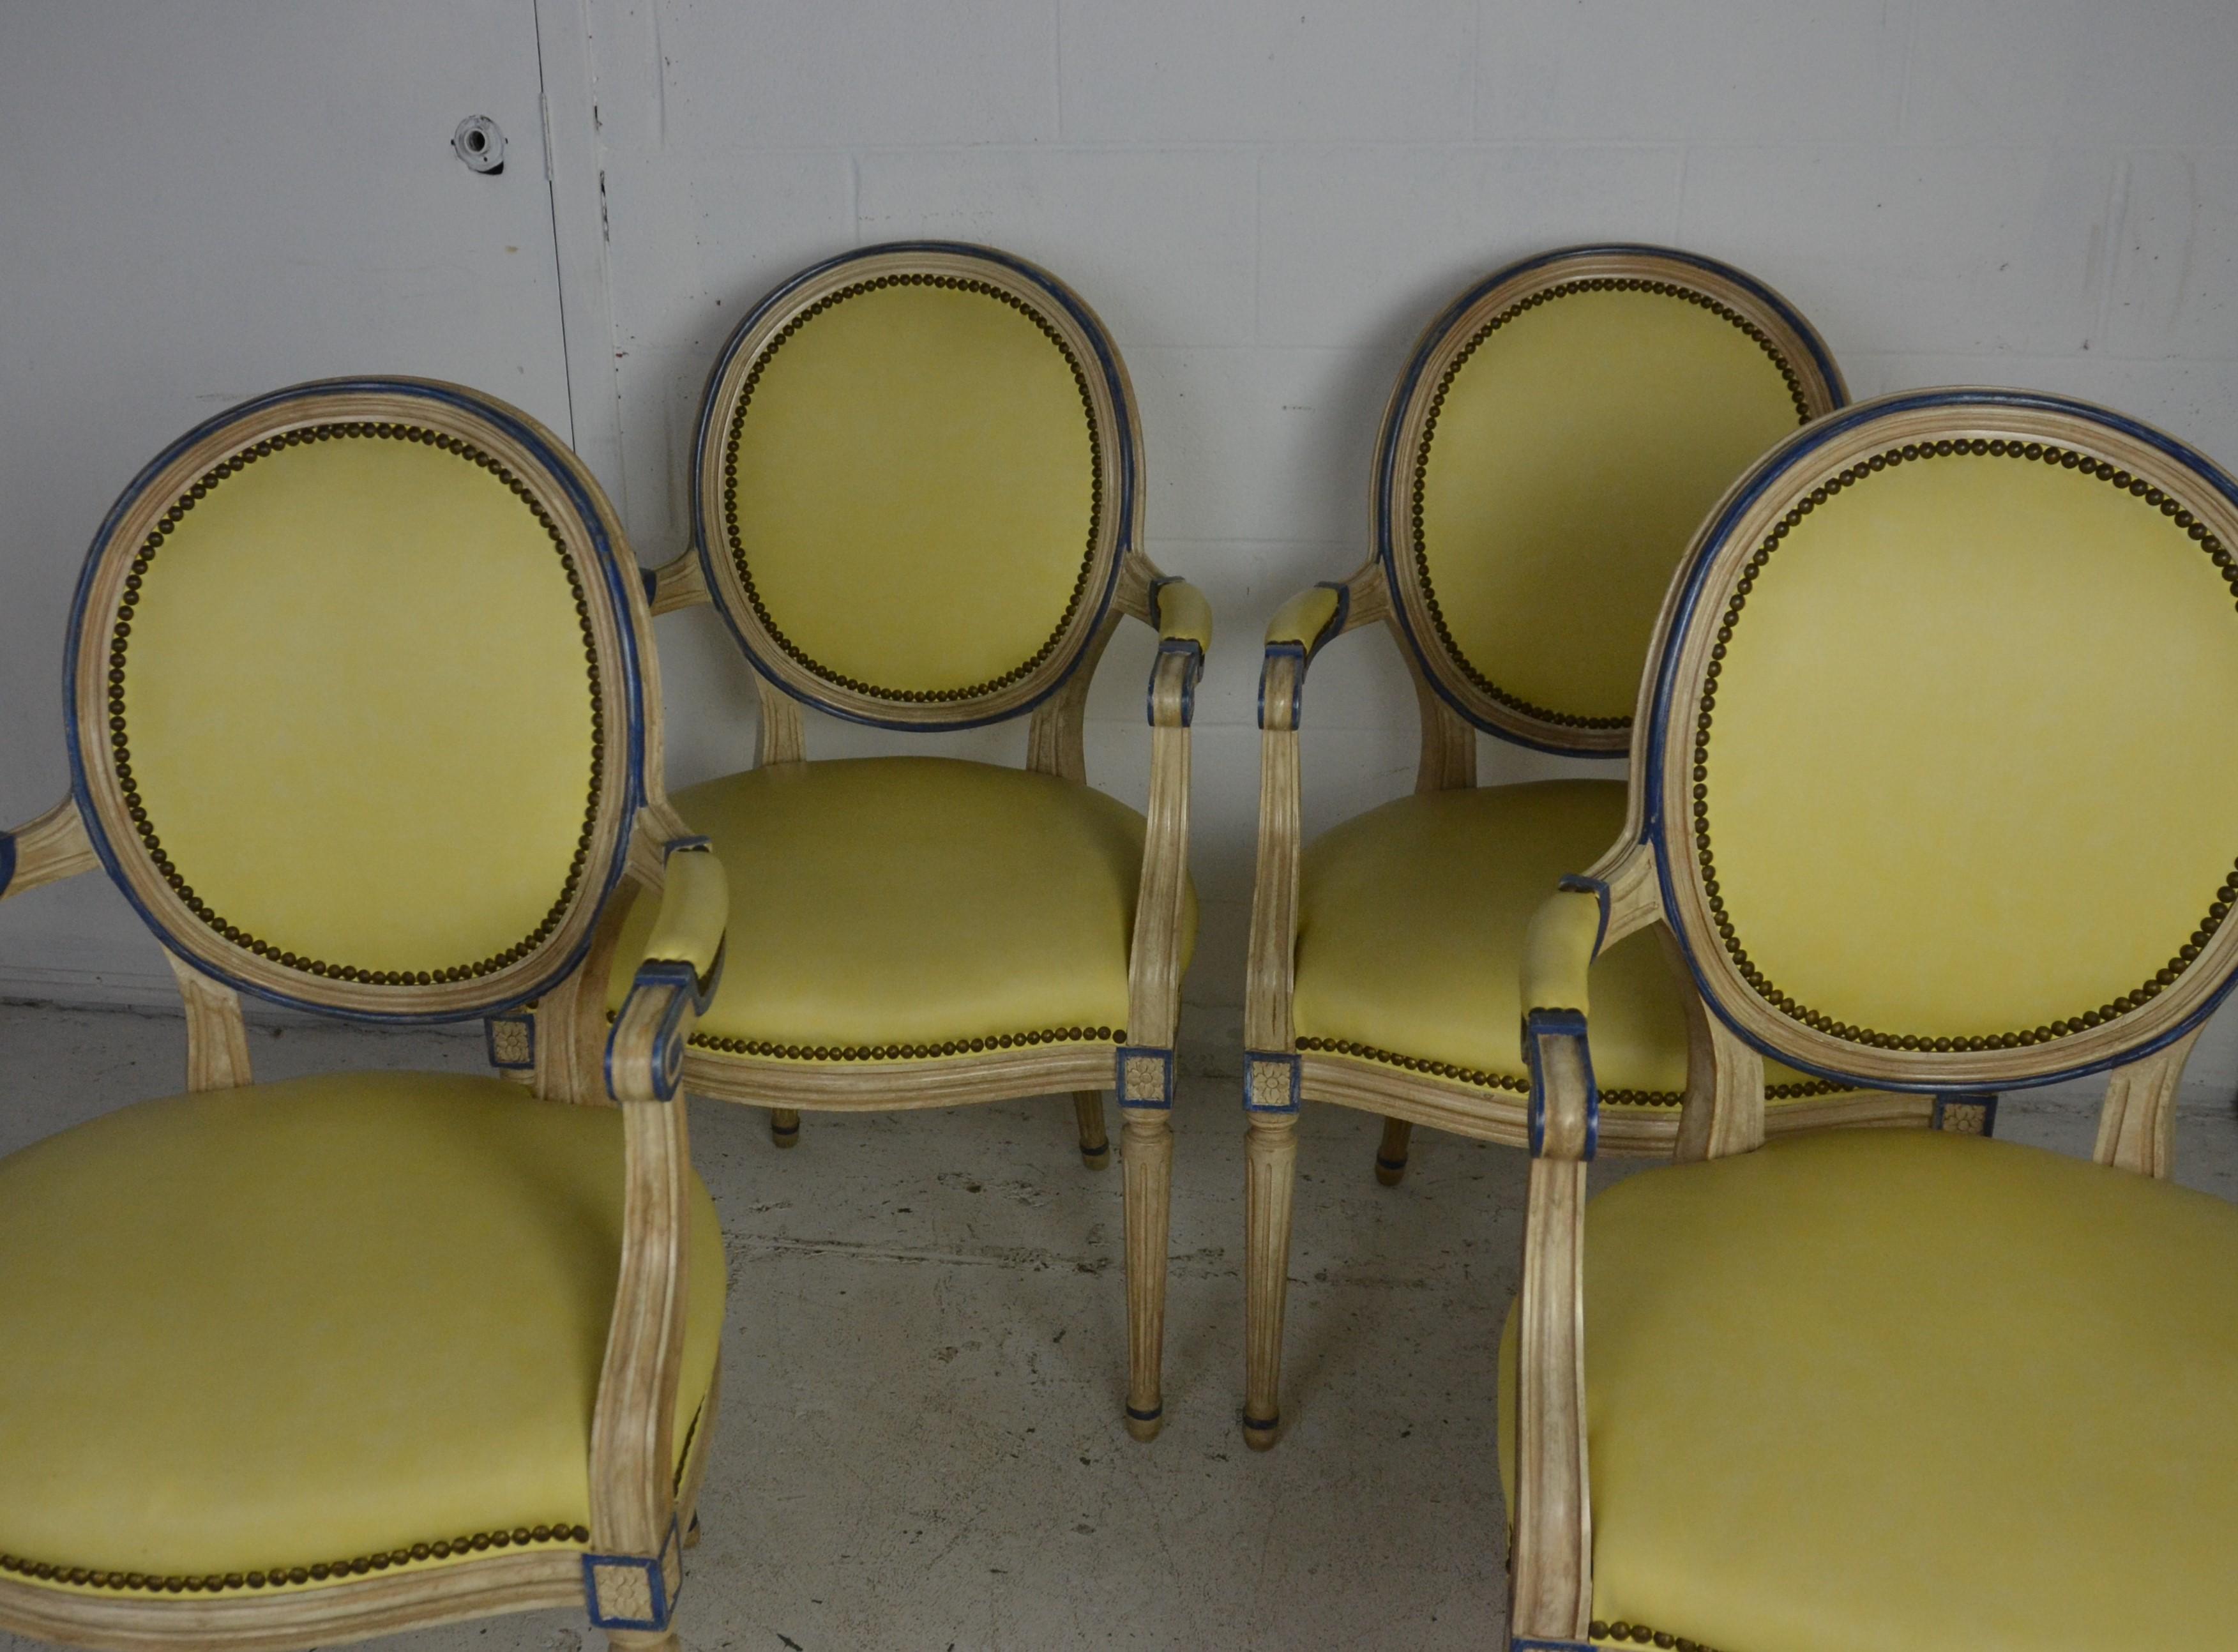 A set of 4 armchairs / dining chairs in the Louis XVI style. Upholstered in light yellow leather. Measure: Arm 26.25